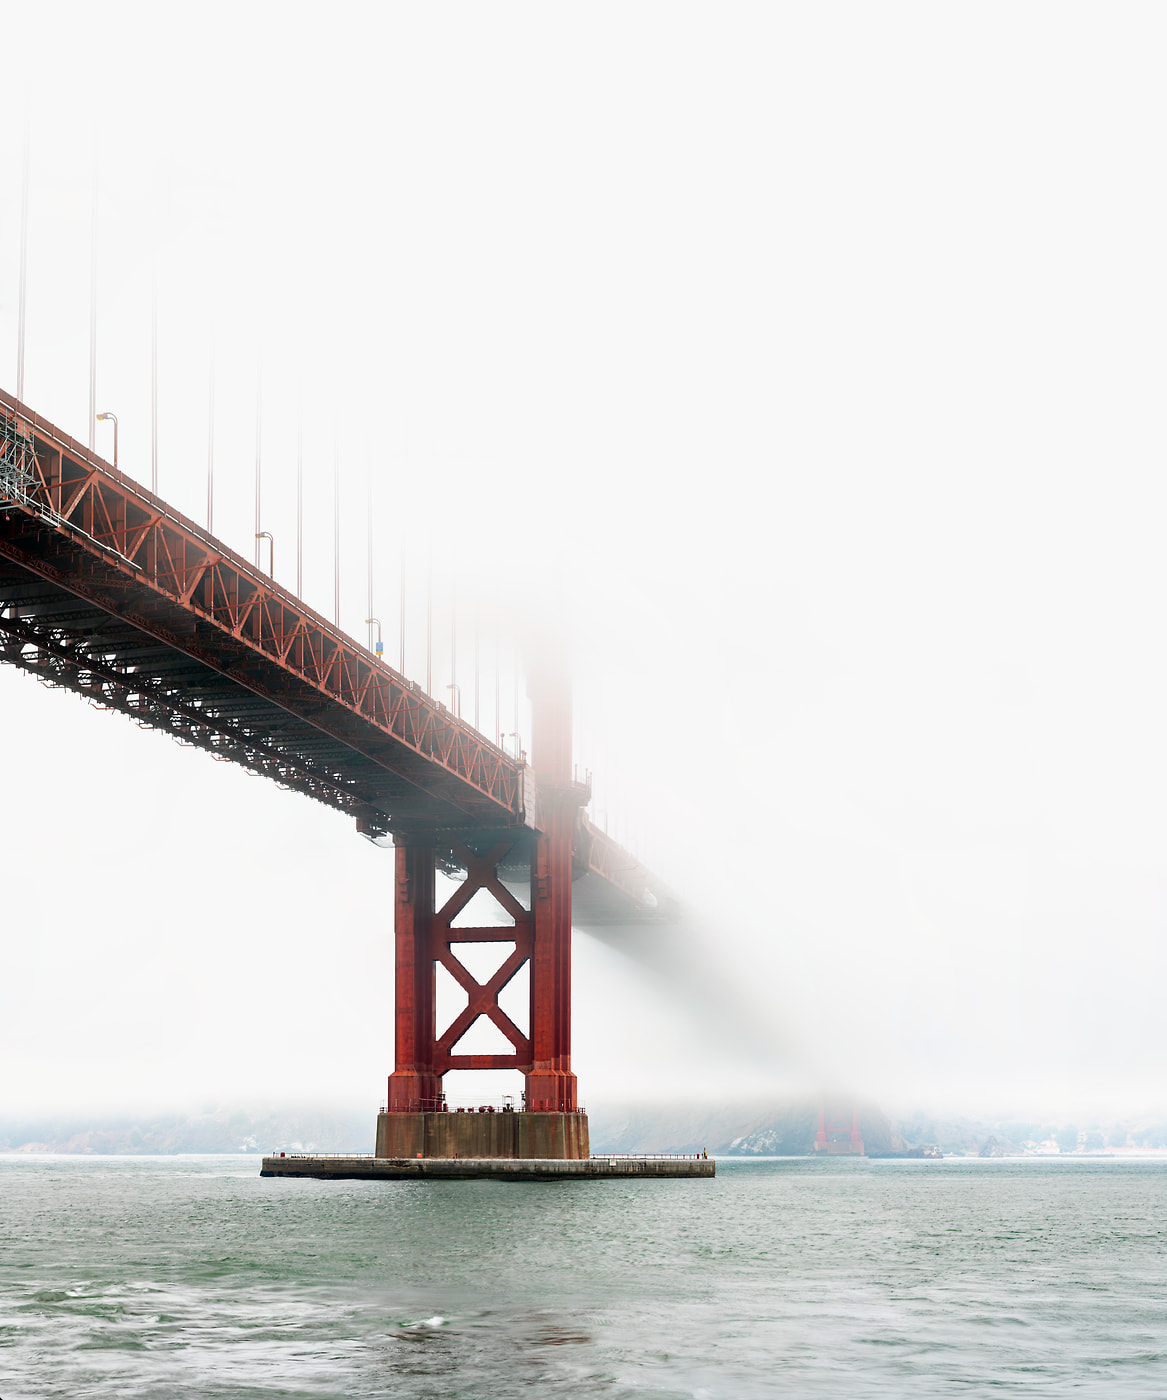 173 megapixels! A very high resolution, large-format VAST photo print of the Golden Gate Bridge in the fog; photograph created by Justin Katz in Fort Point, Golden Gate Recreation Area, San Francisco, California